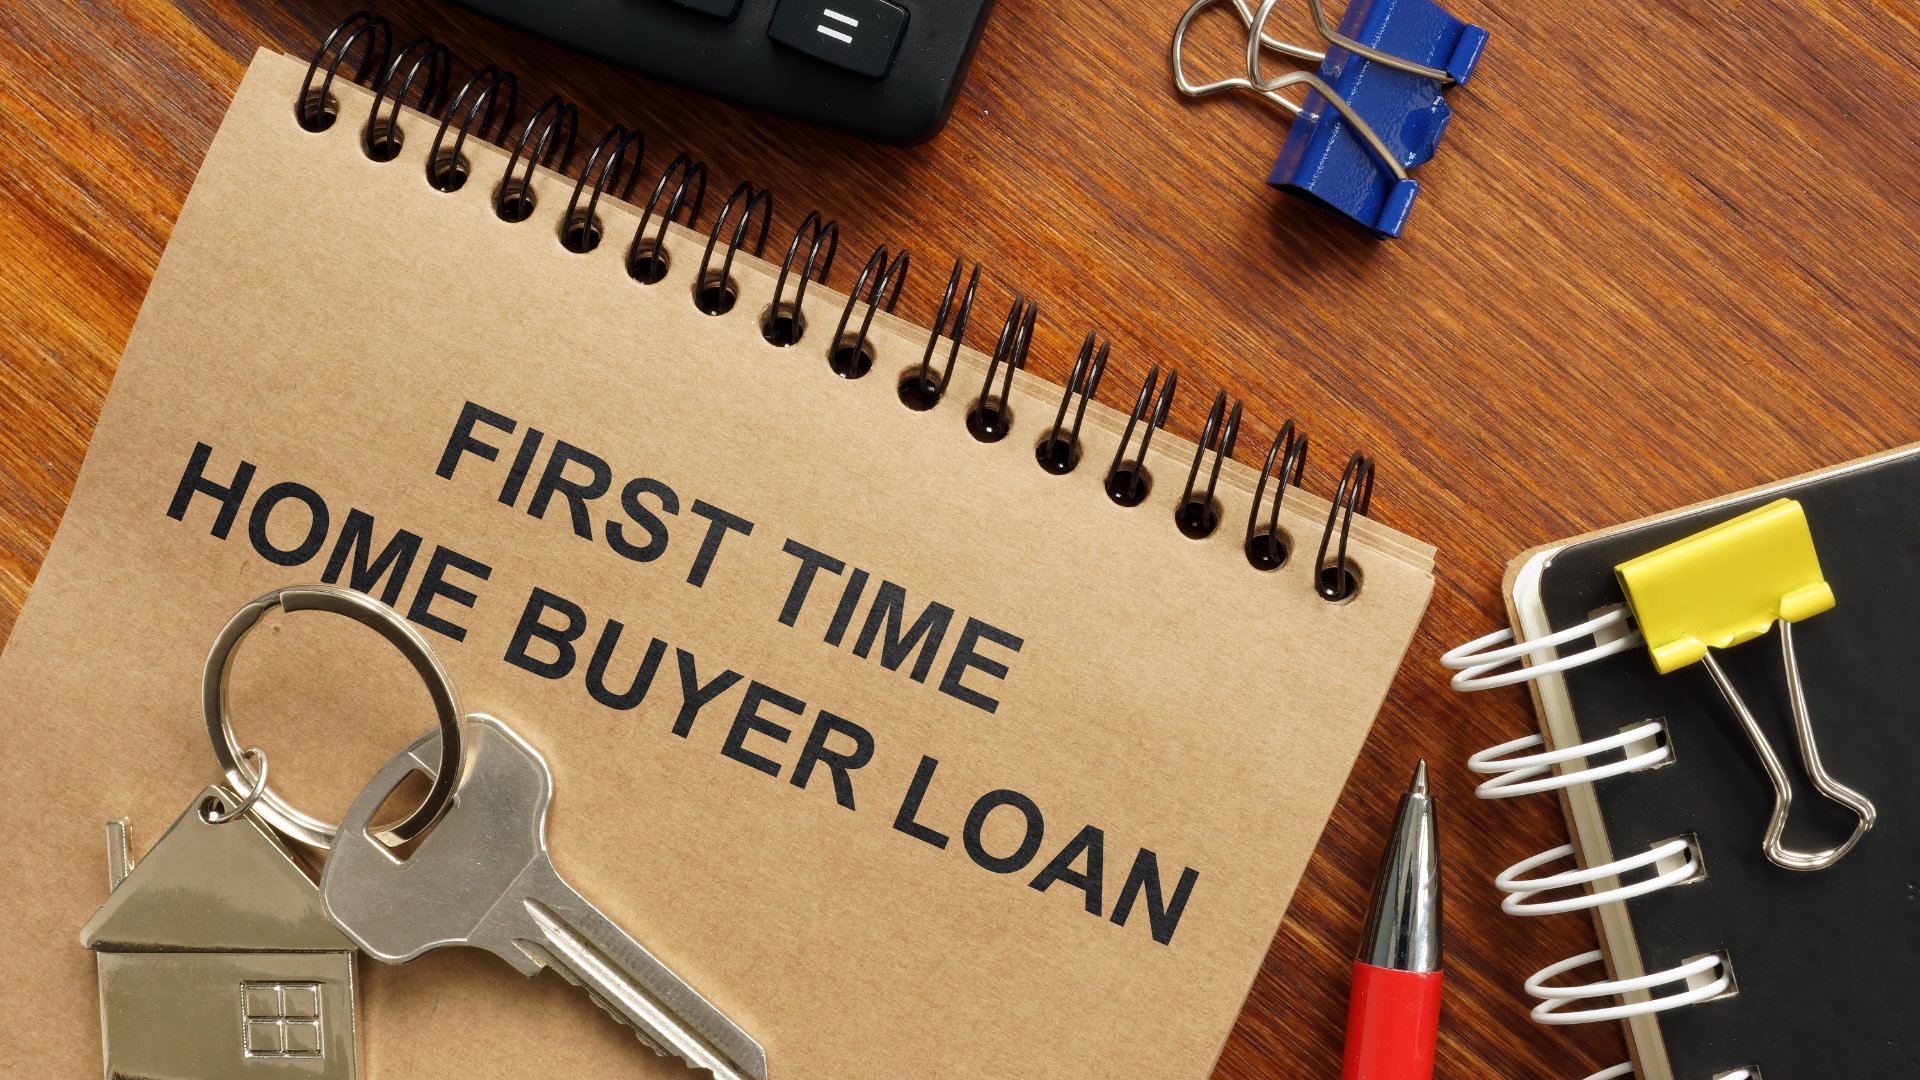 Can a First-Time Home Buyer Get a 5% Loan?